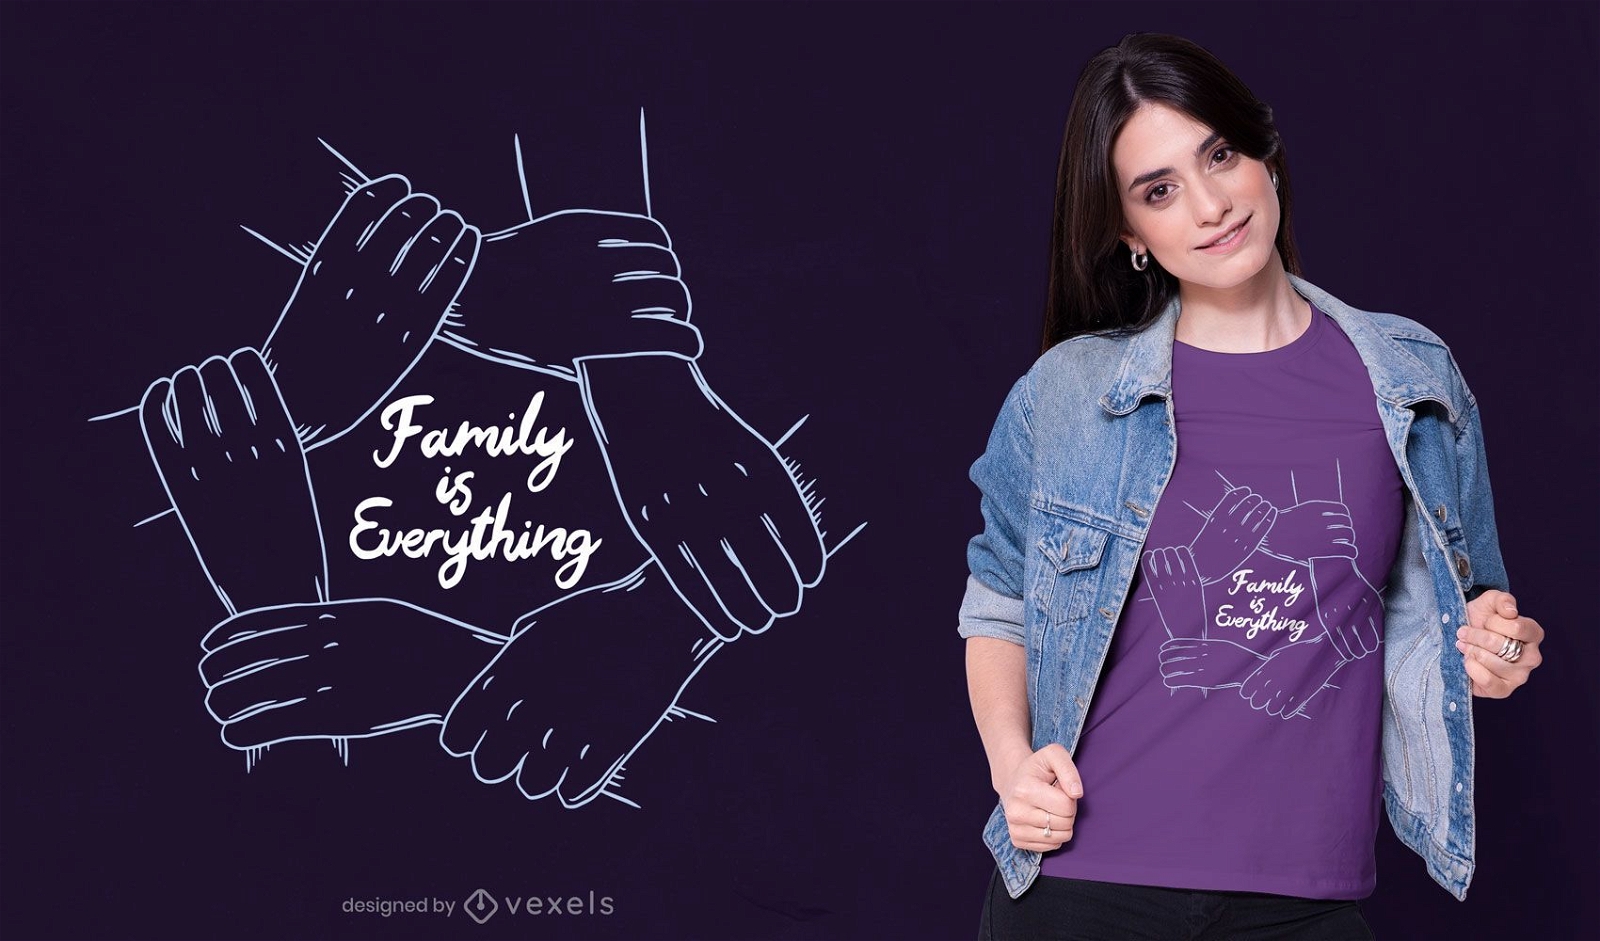 Family is everything t-shirt design